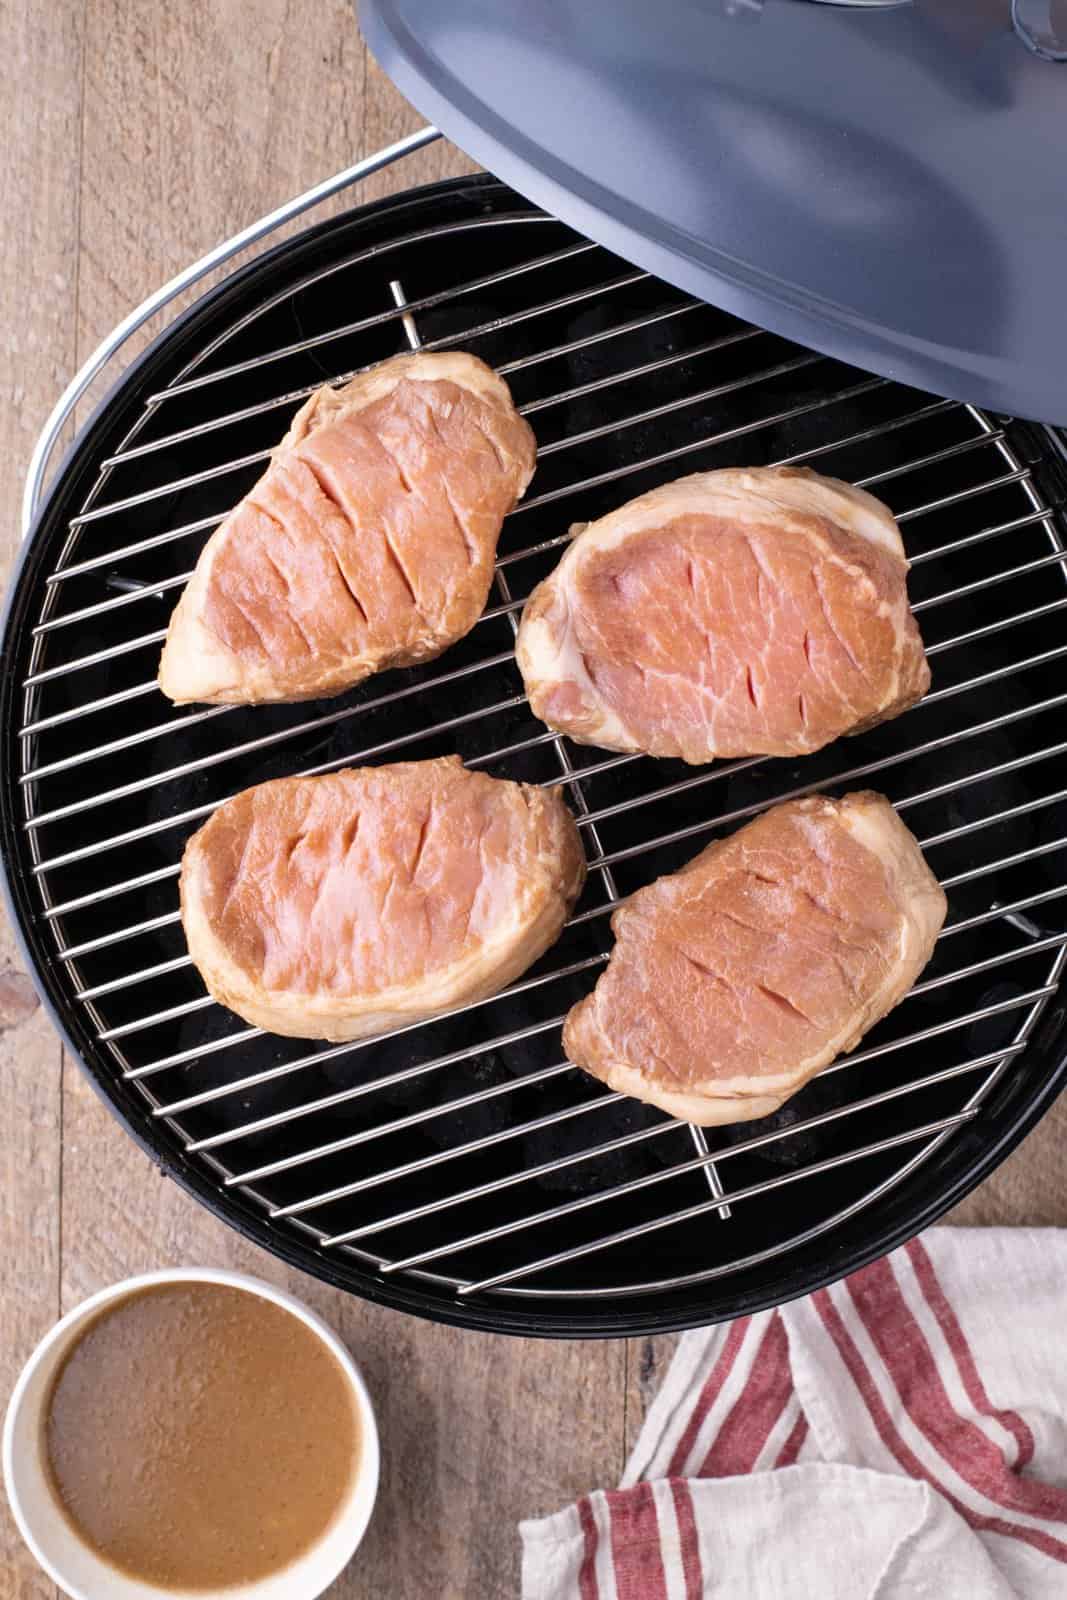 Marinated pork chops on grill.